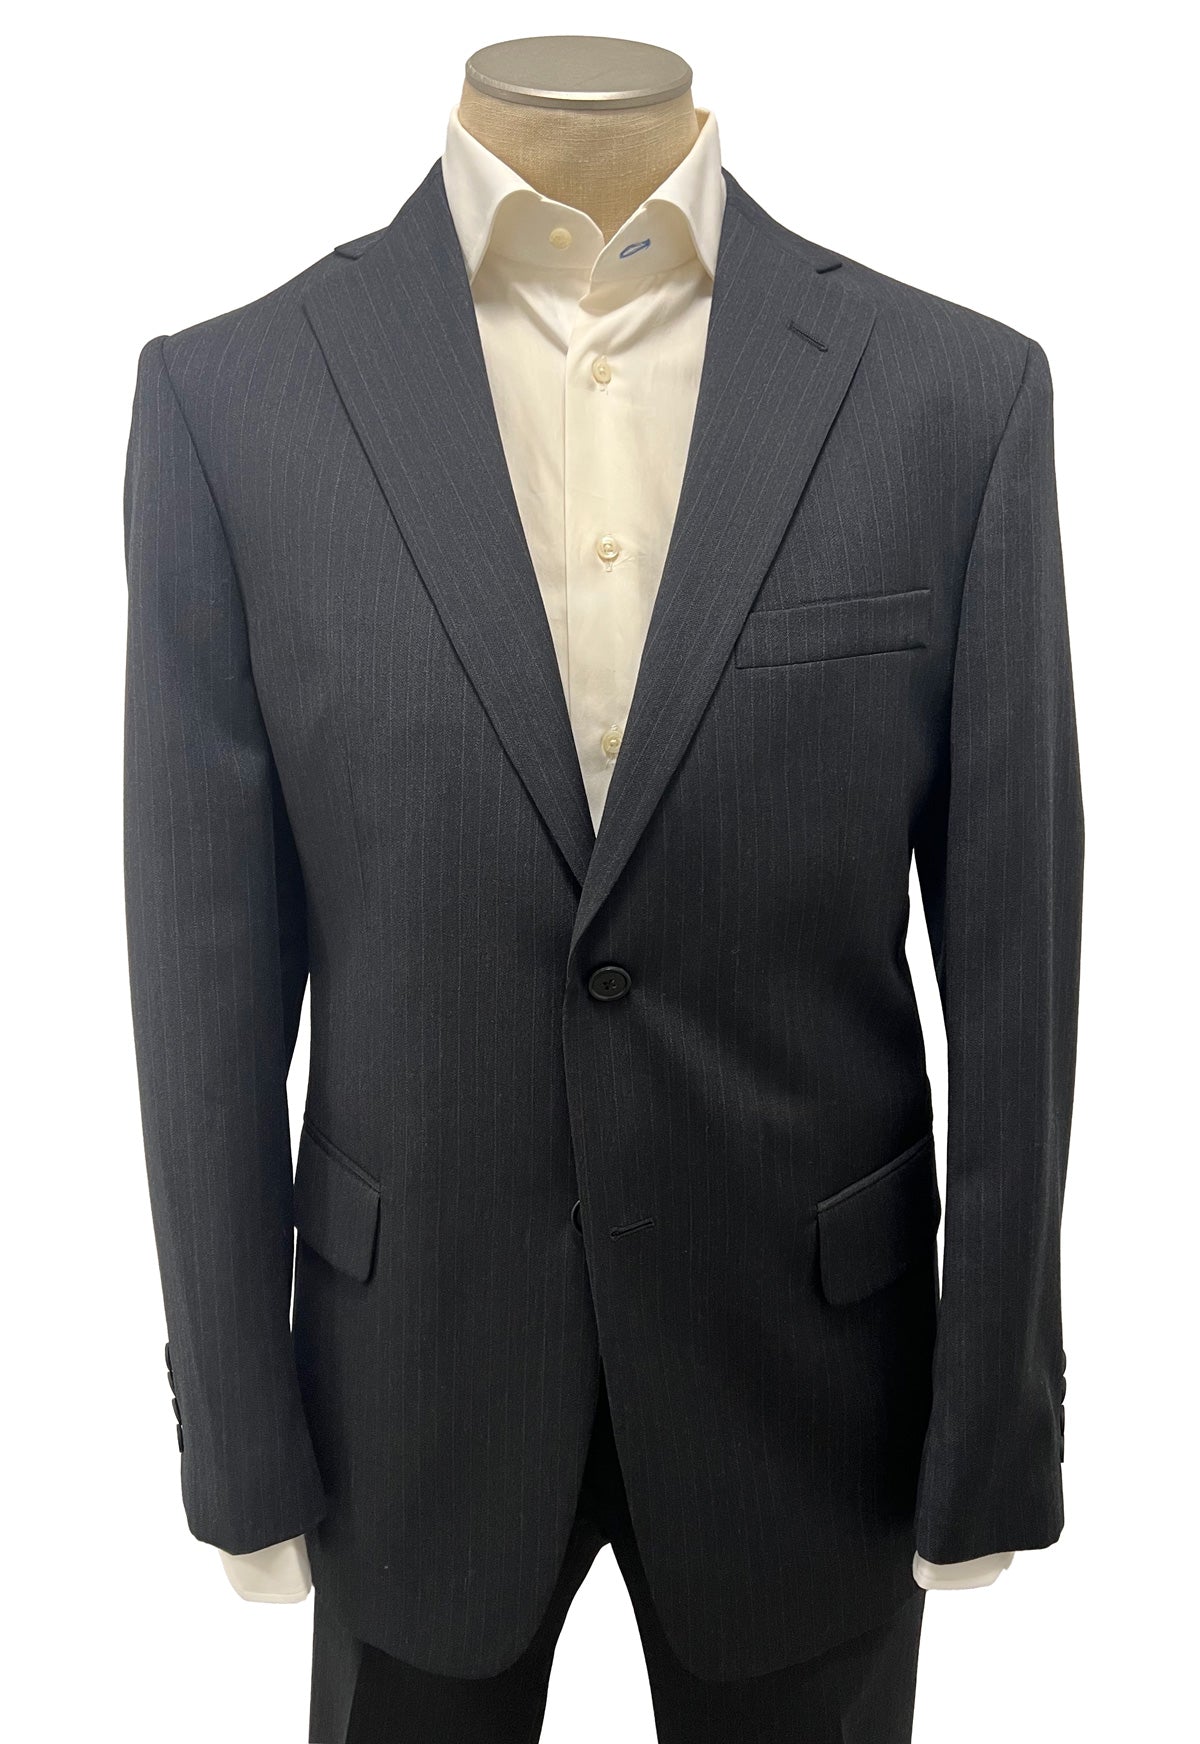 Men's Flat Front Pant Nested Suit Classic Cut - GREY STRIPE 100% WORSTED WOOL